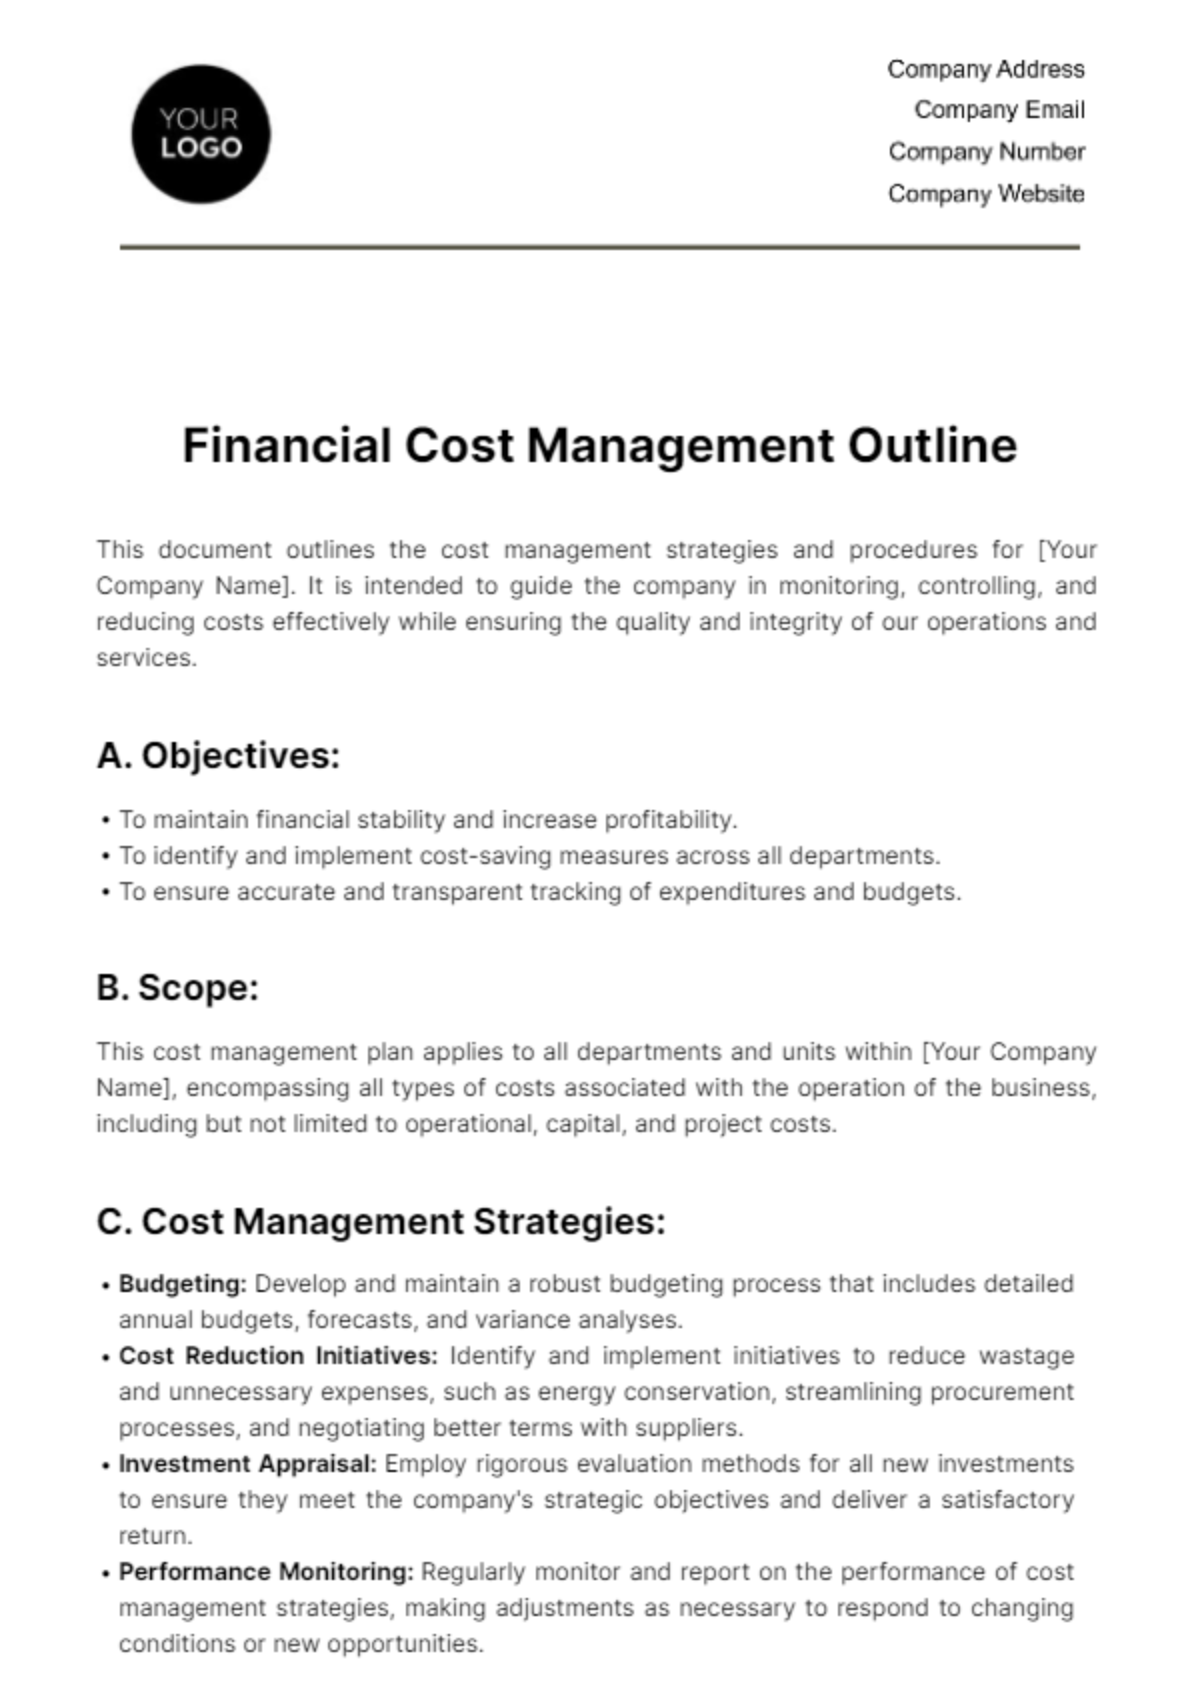 Free Financial Cost Management Outline Template